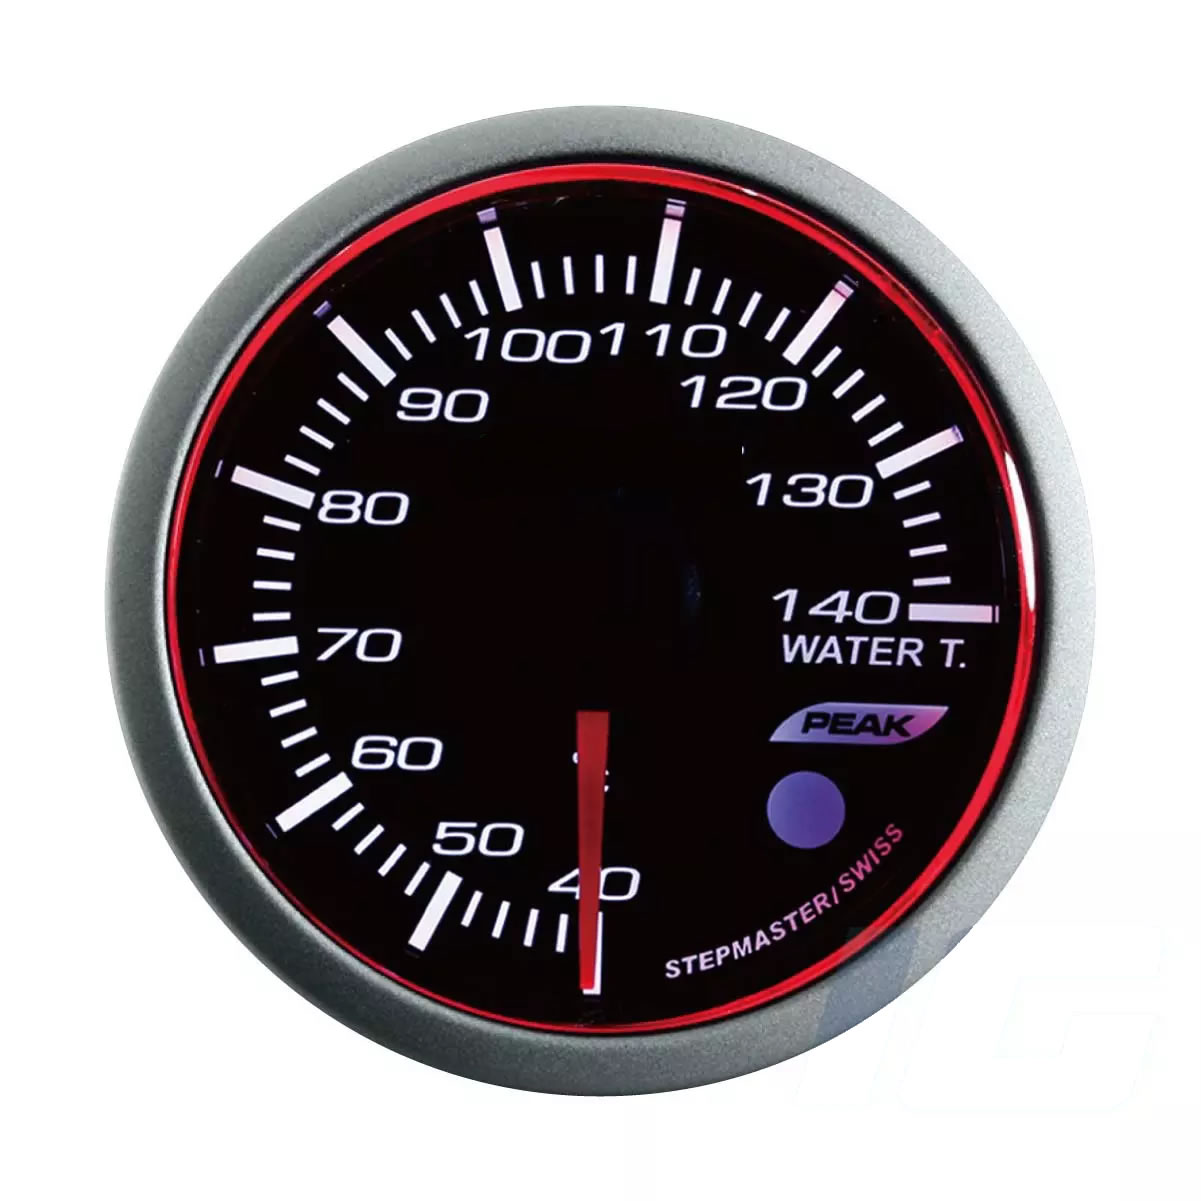 60mm White and Blue and Amber LED Performance Car Gauges - Water Temp Gauge With Sensor and Warning and Peak For Your Sport Racing Car